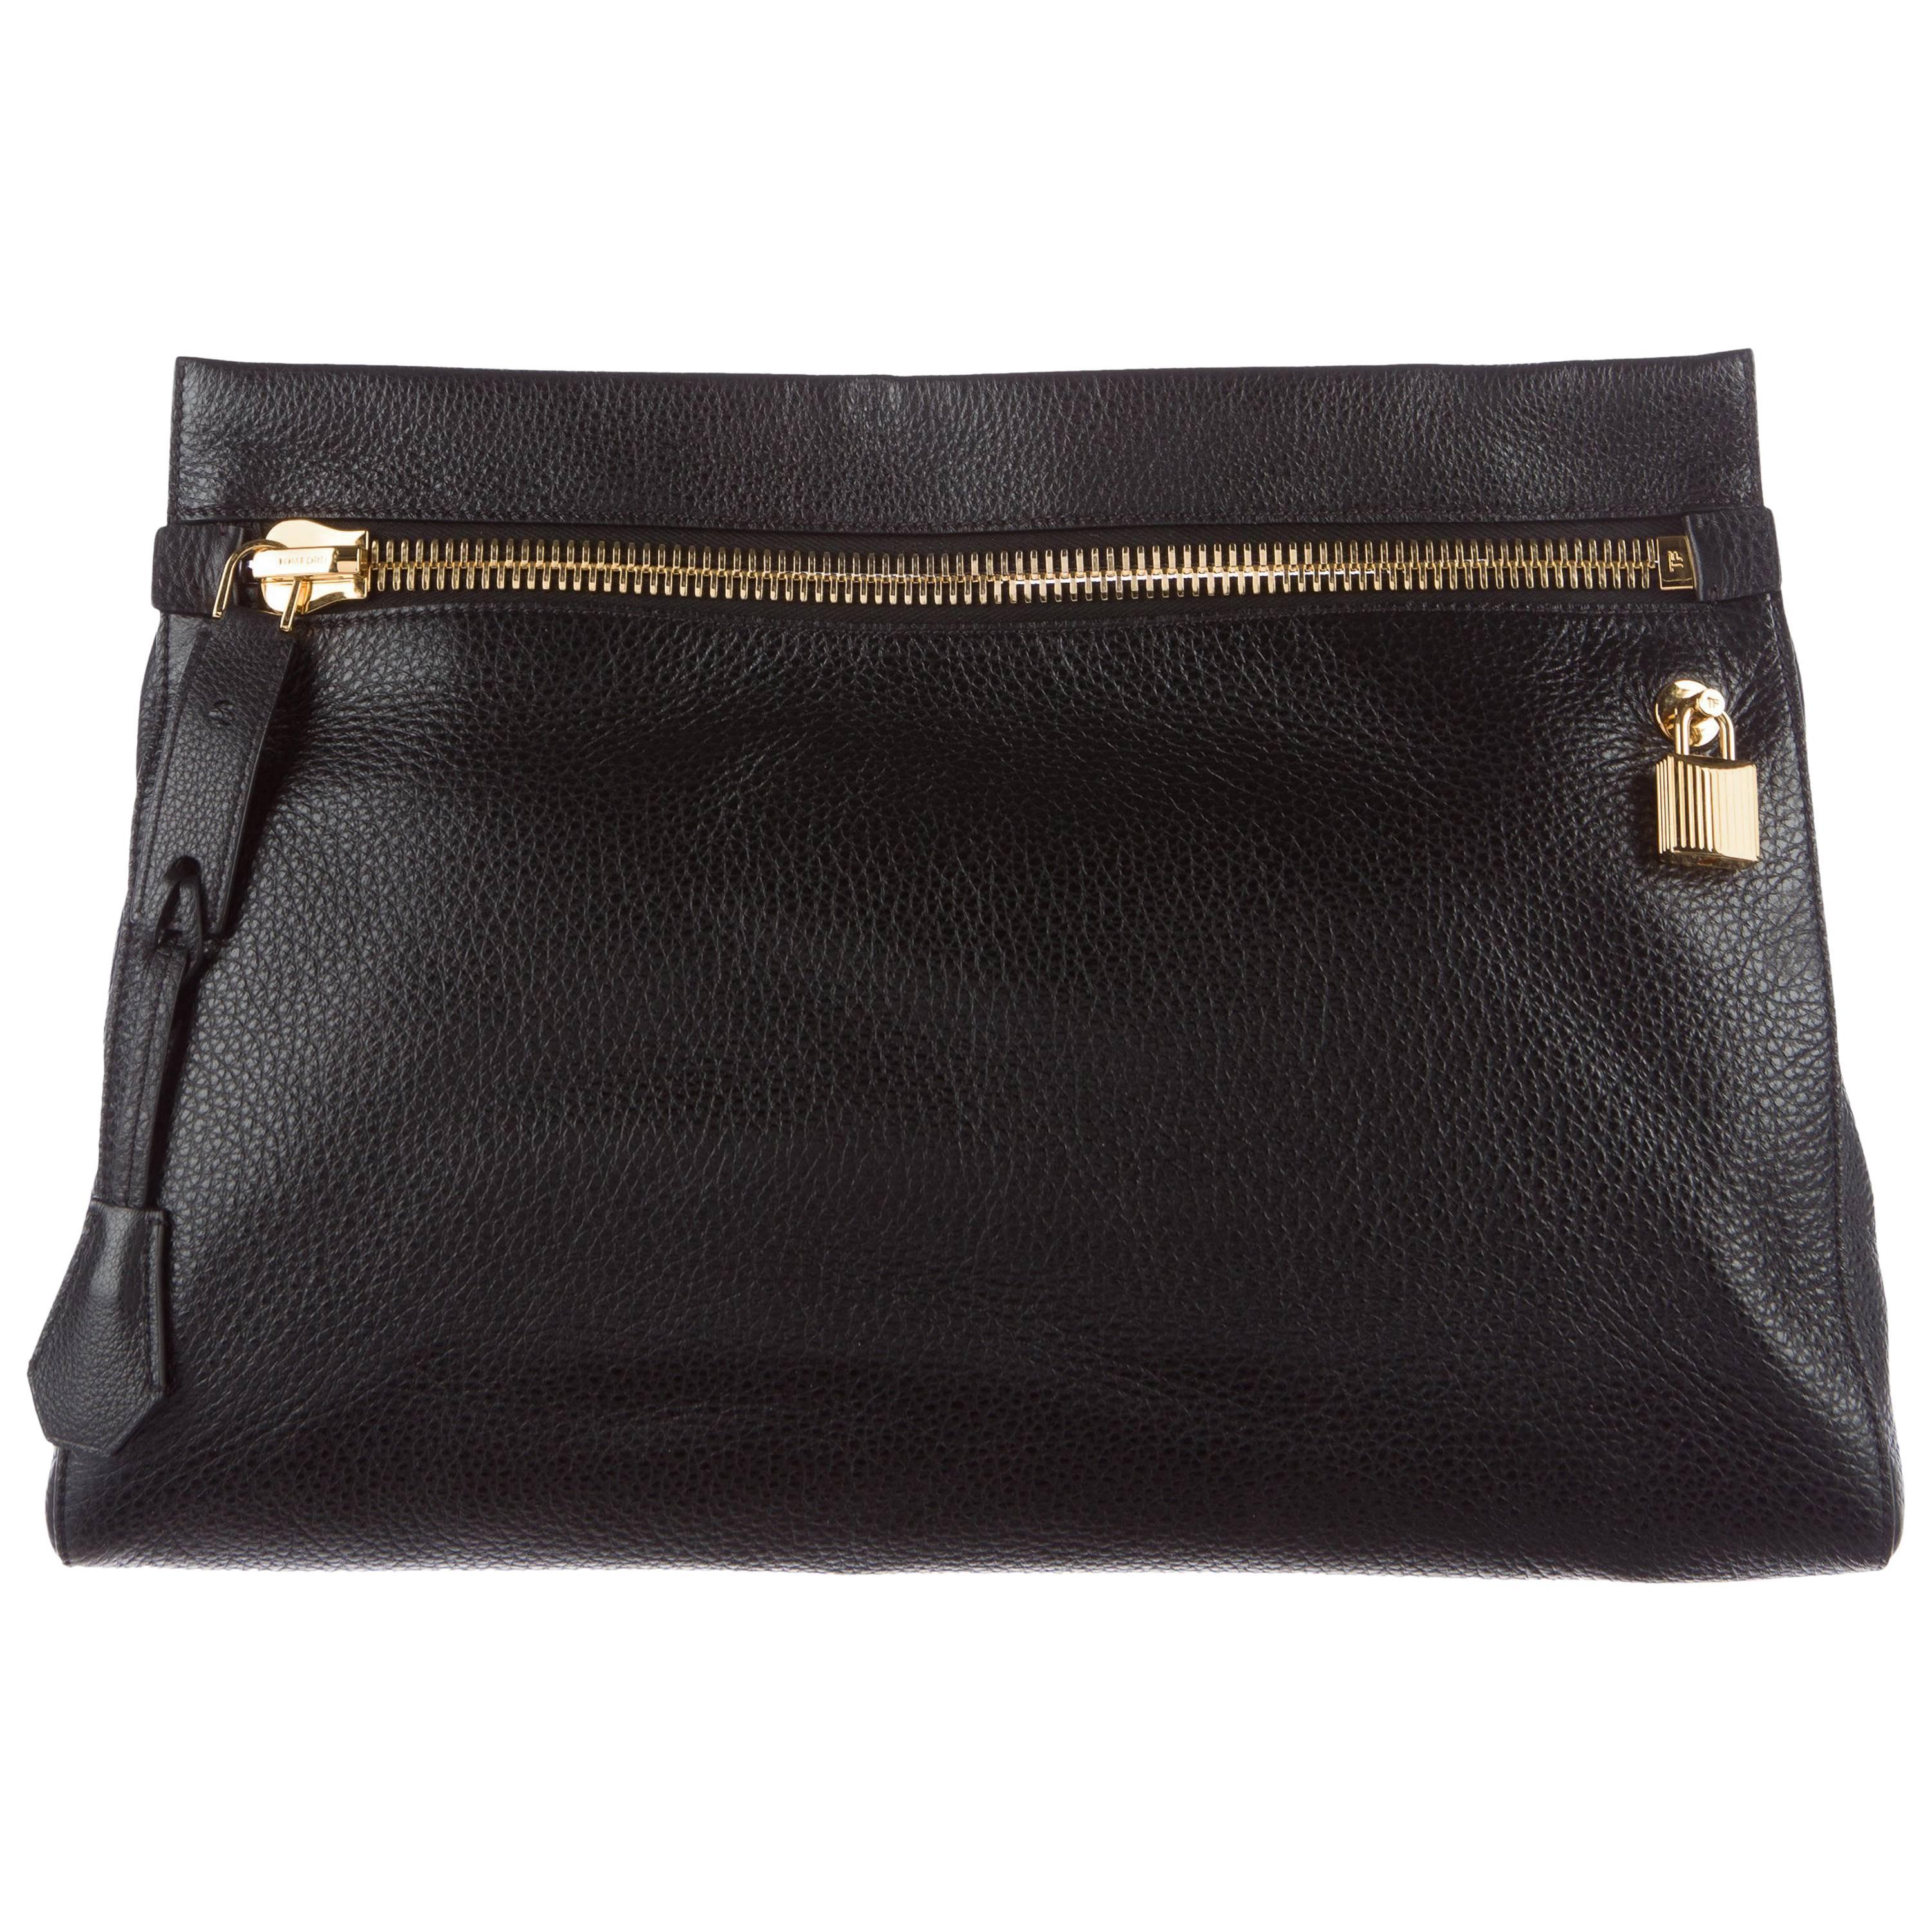 Tom Ford Black Leather Gold Zip Large Envelope Evening Clutch with Accessories